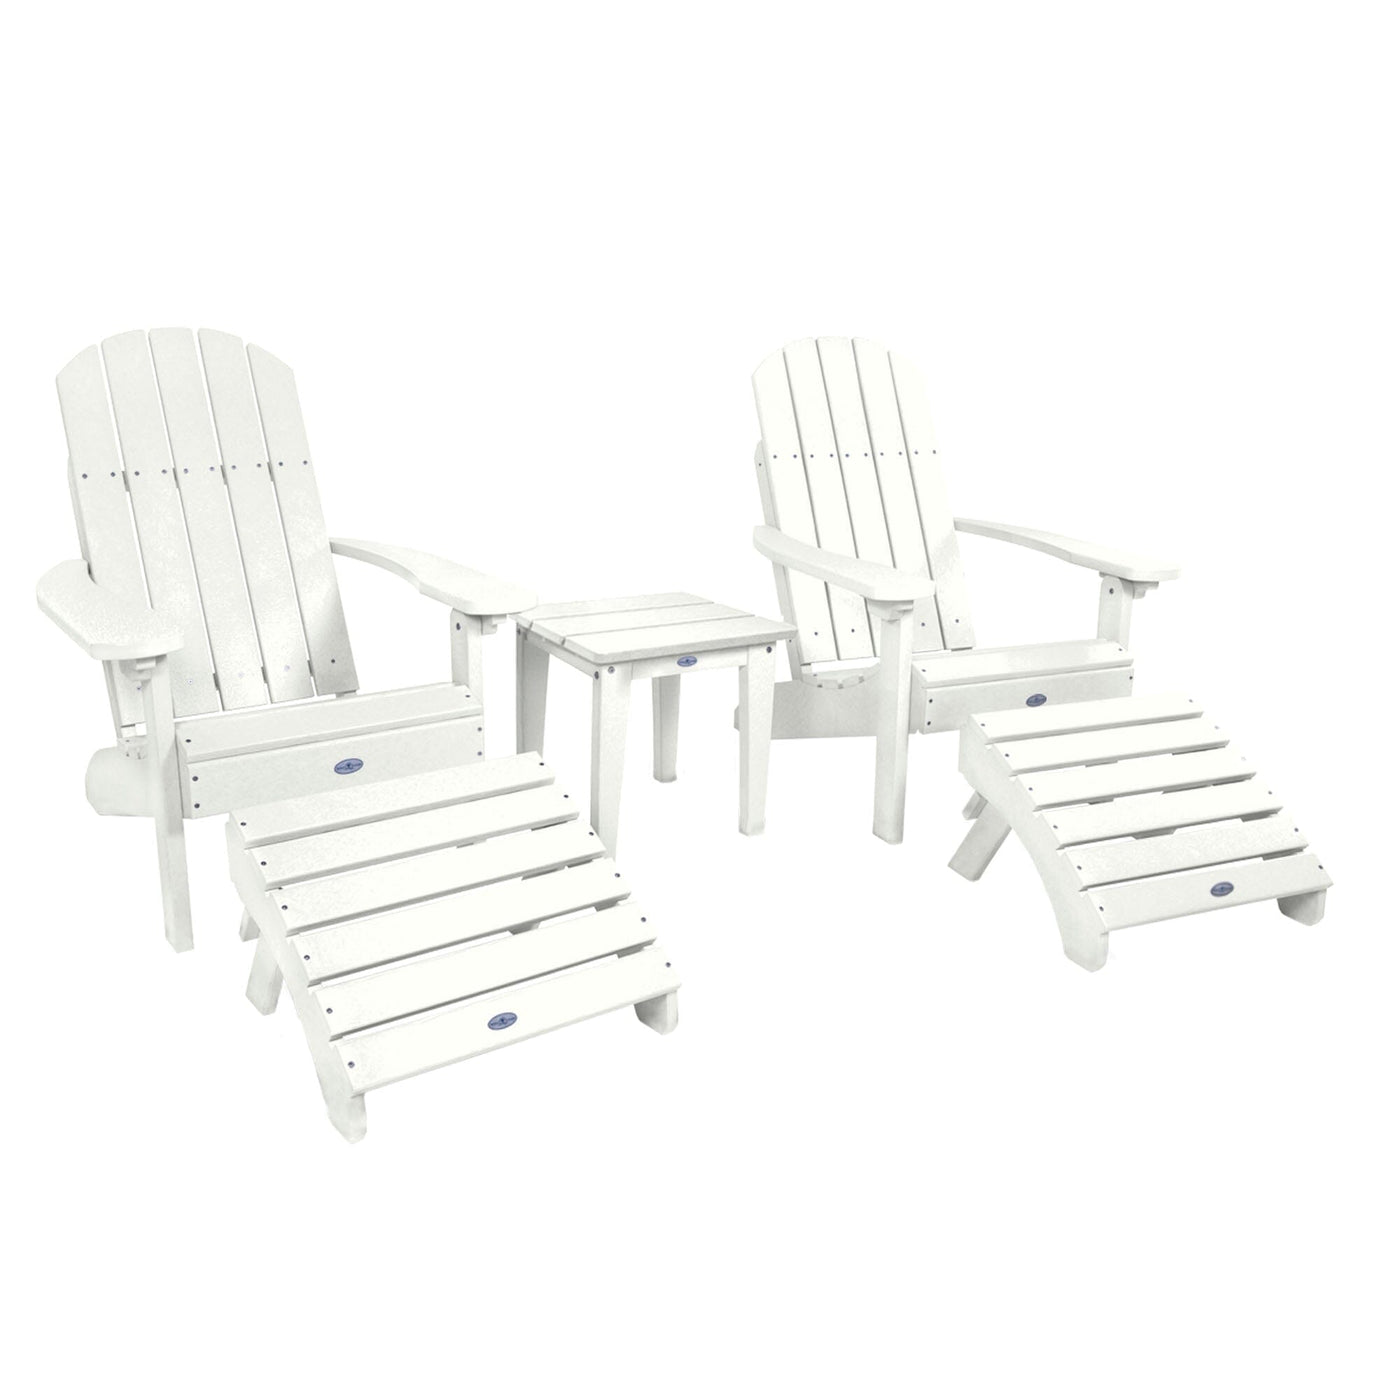 Two Cape Classic Adirondack Chairs, Side Table and Ottoman 5 pc Set Kitted Set Bahia Verde Outdoors Coconut White 